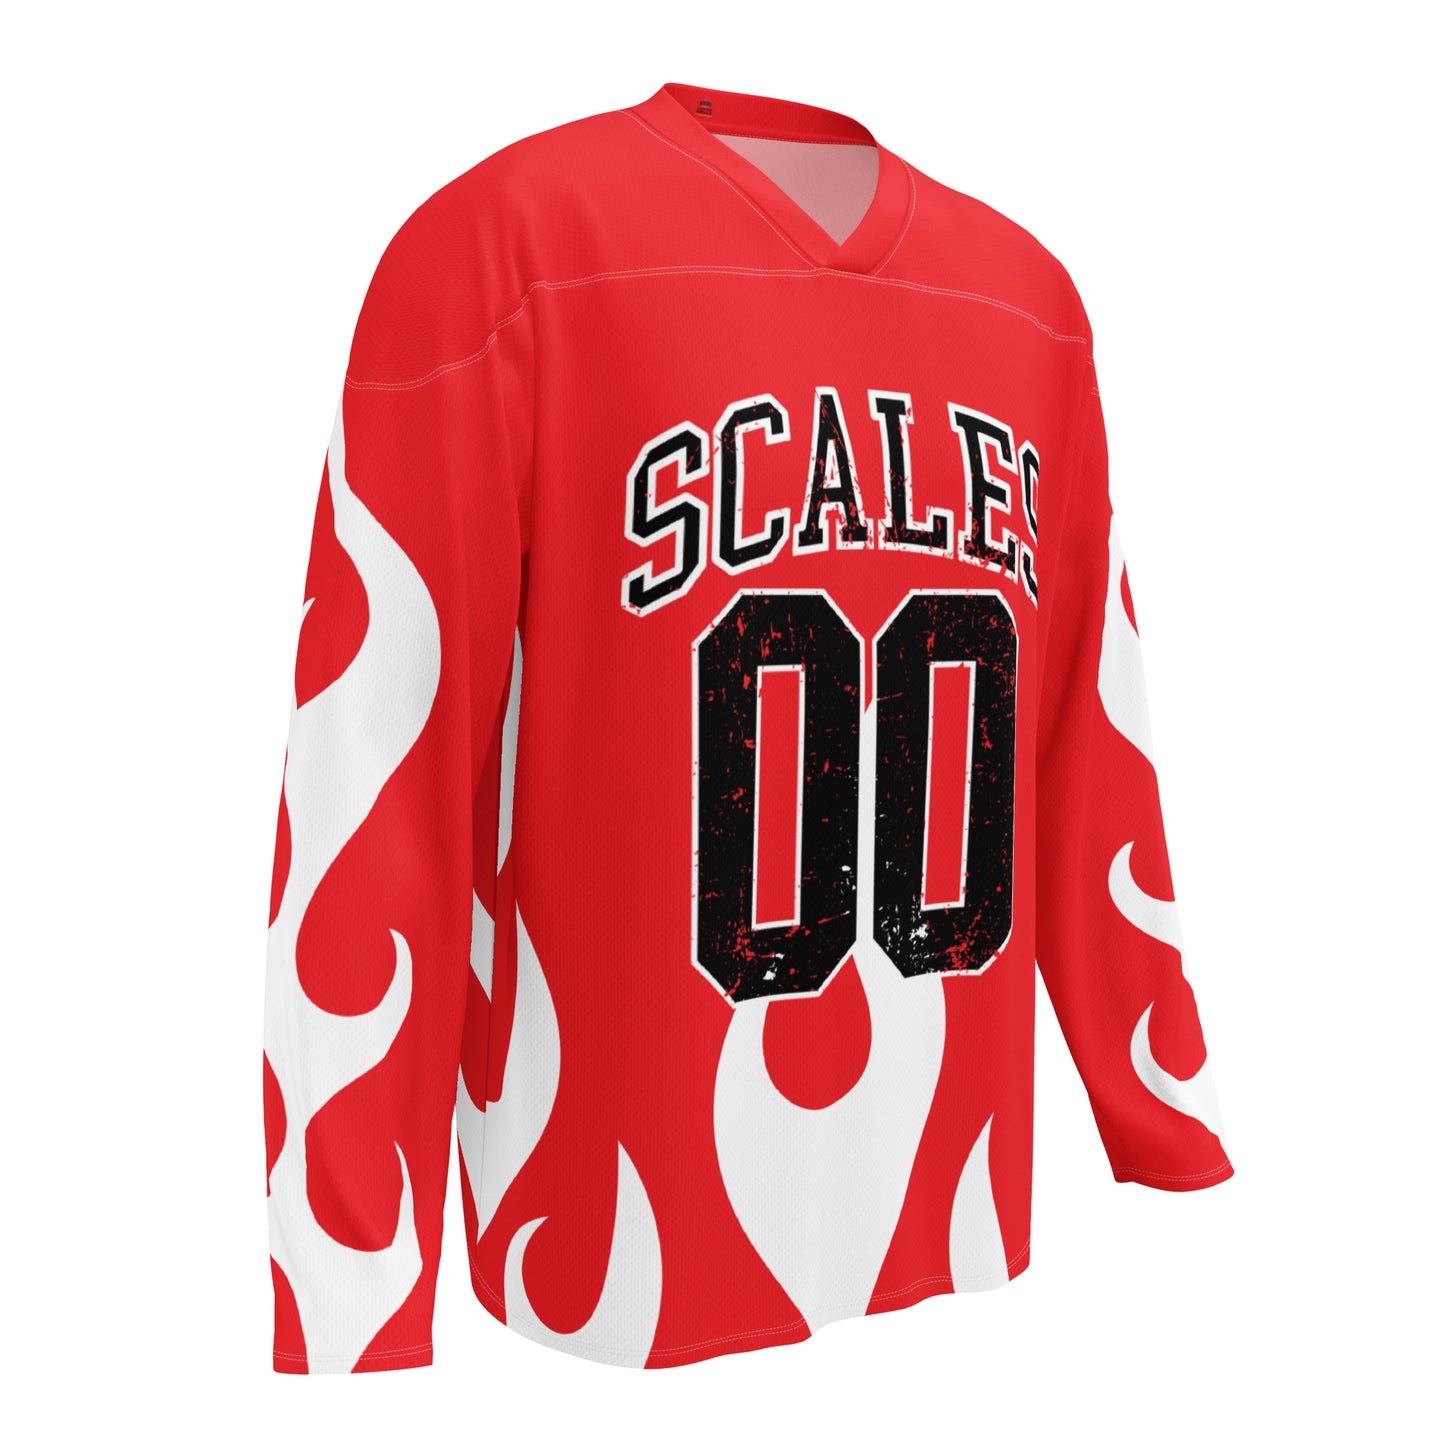 Red Scales Hockey jersey